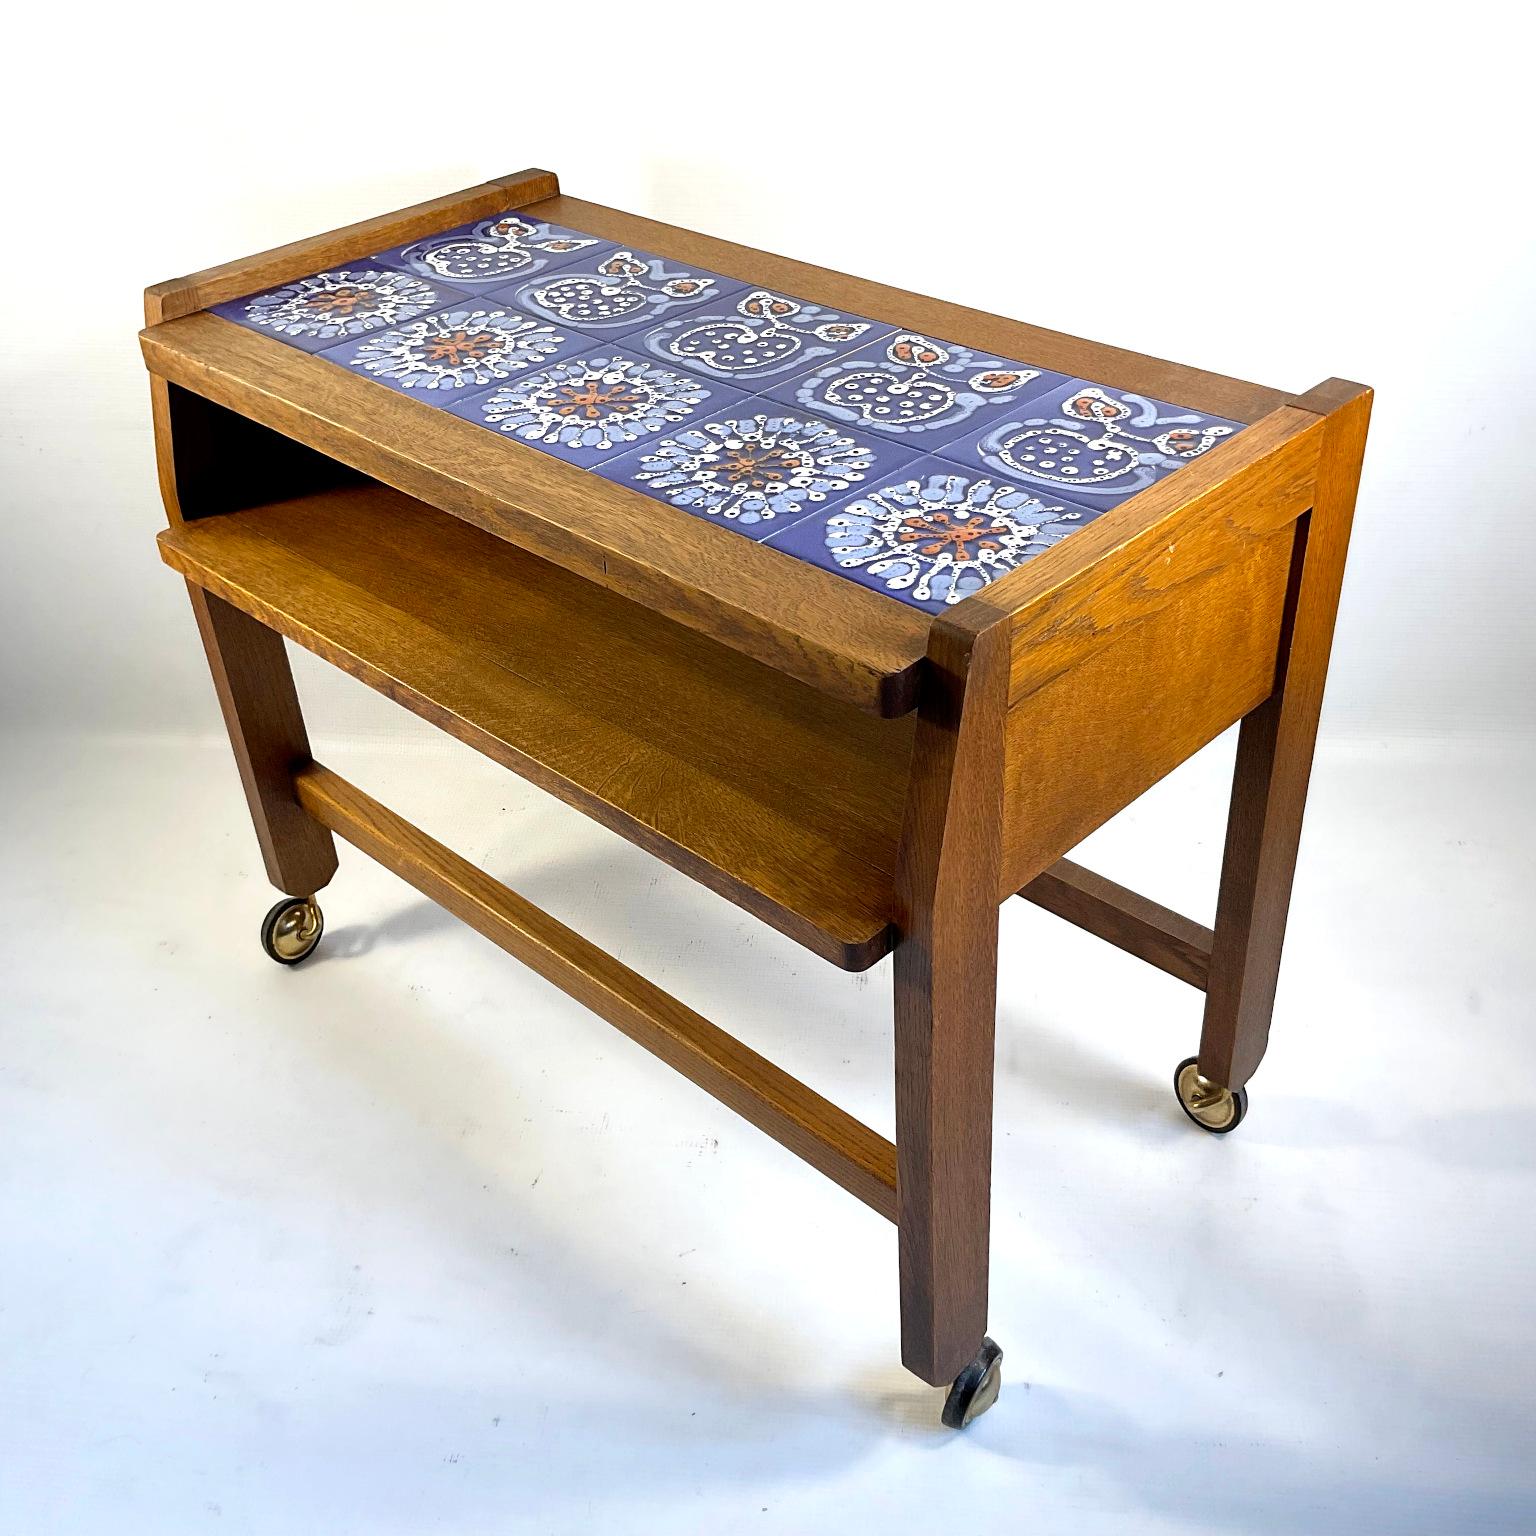 1960s Guillerme Et Chambron side table or console table with a blue ceramic tiles pattern made by Boleslaw Danikowski, ceramist appointed by the creators Guillerme and Chambron.
Edited by 